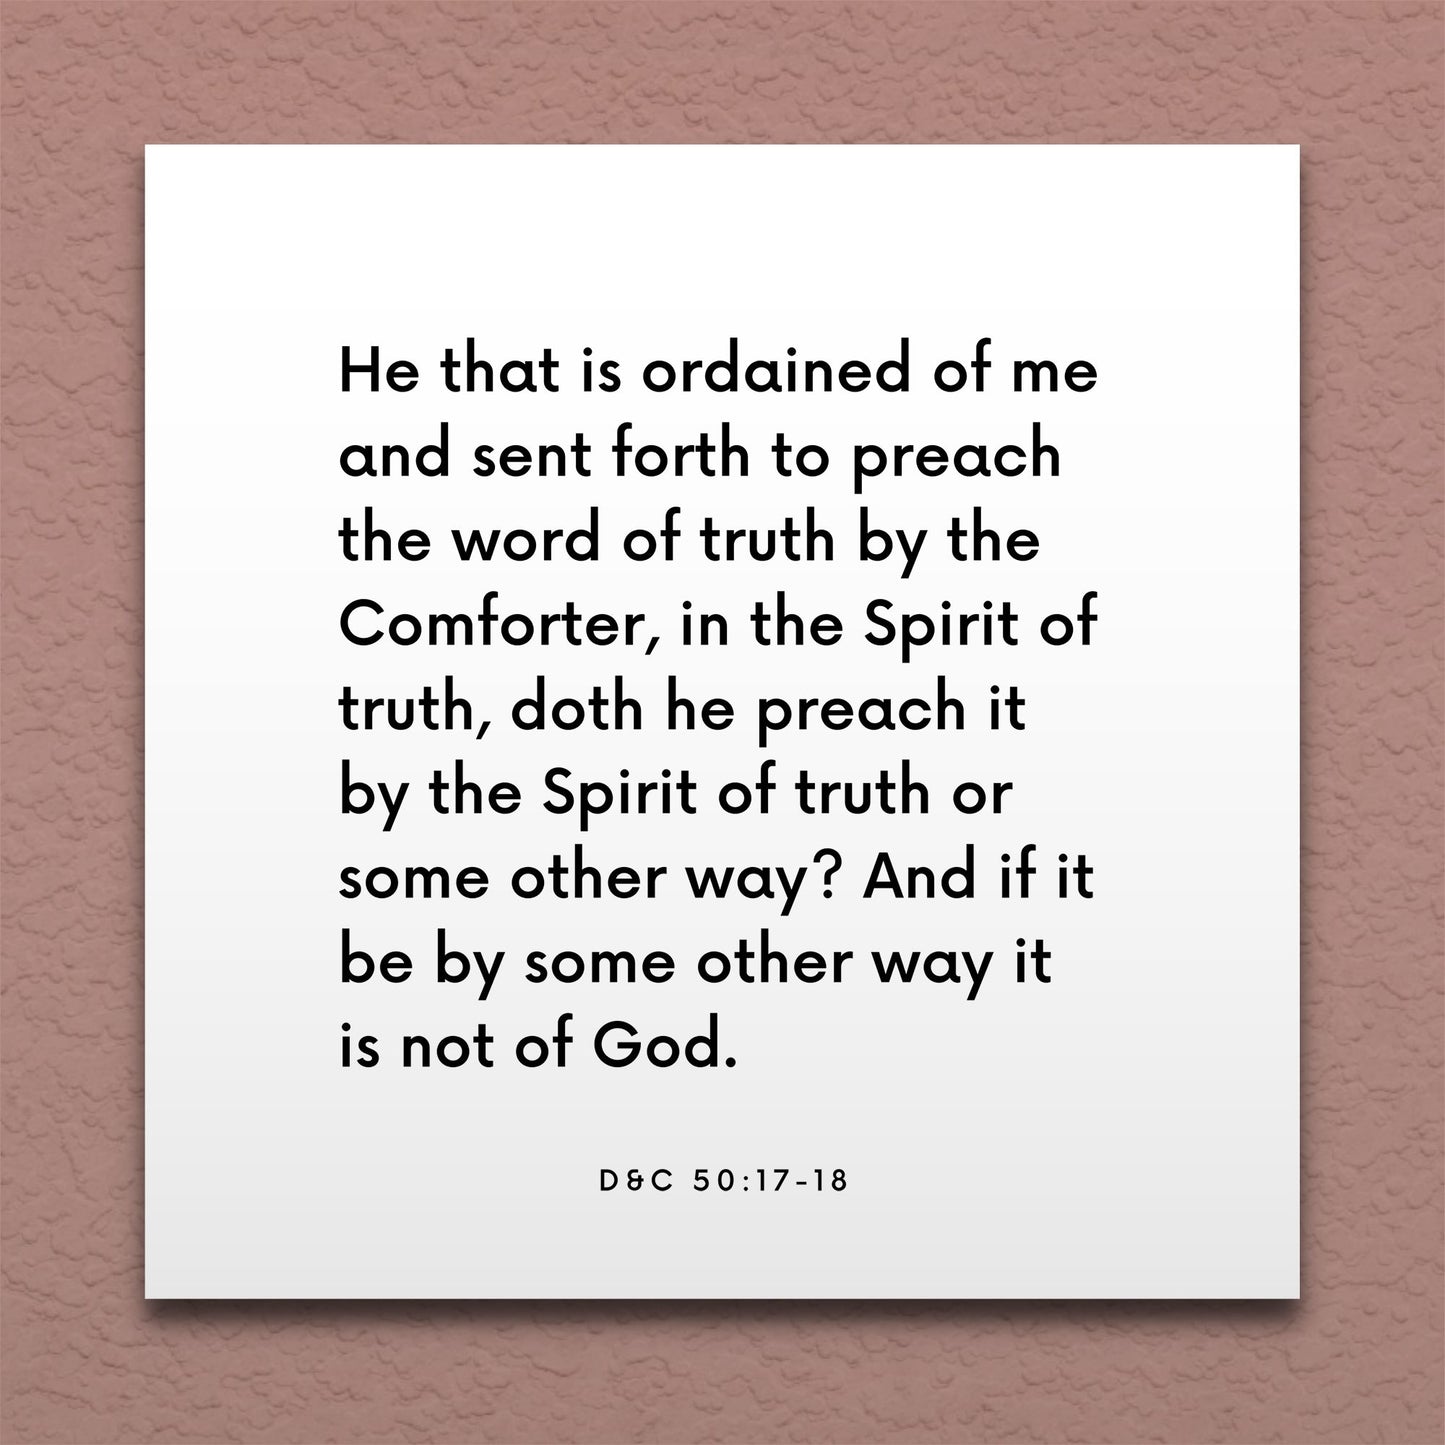 Wall-mounted scripture tile for D&C 50:17-18 - "He that is ordained of me and sent forth to preach"